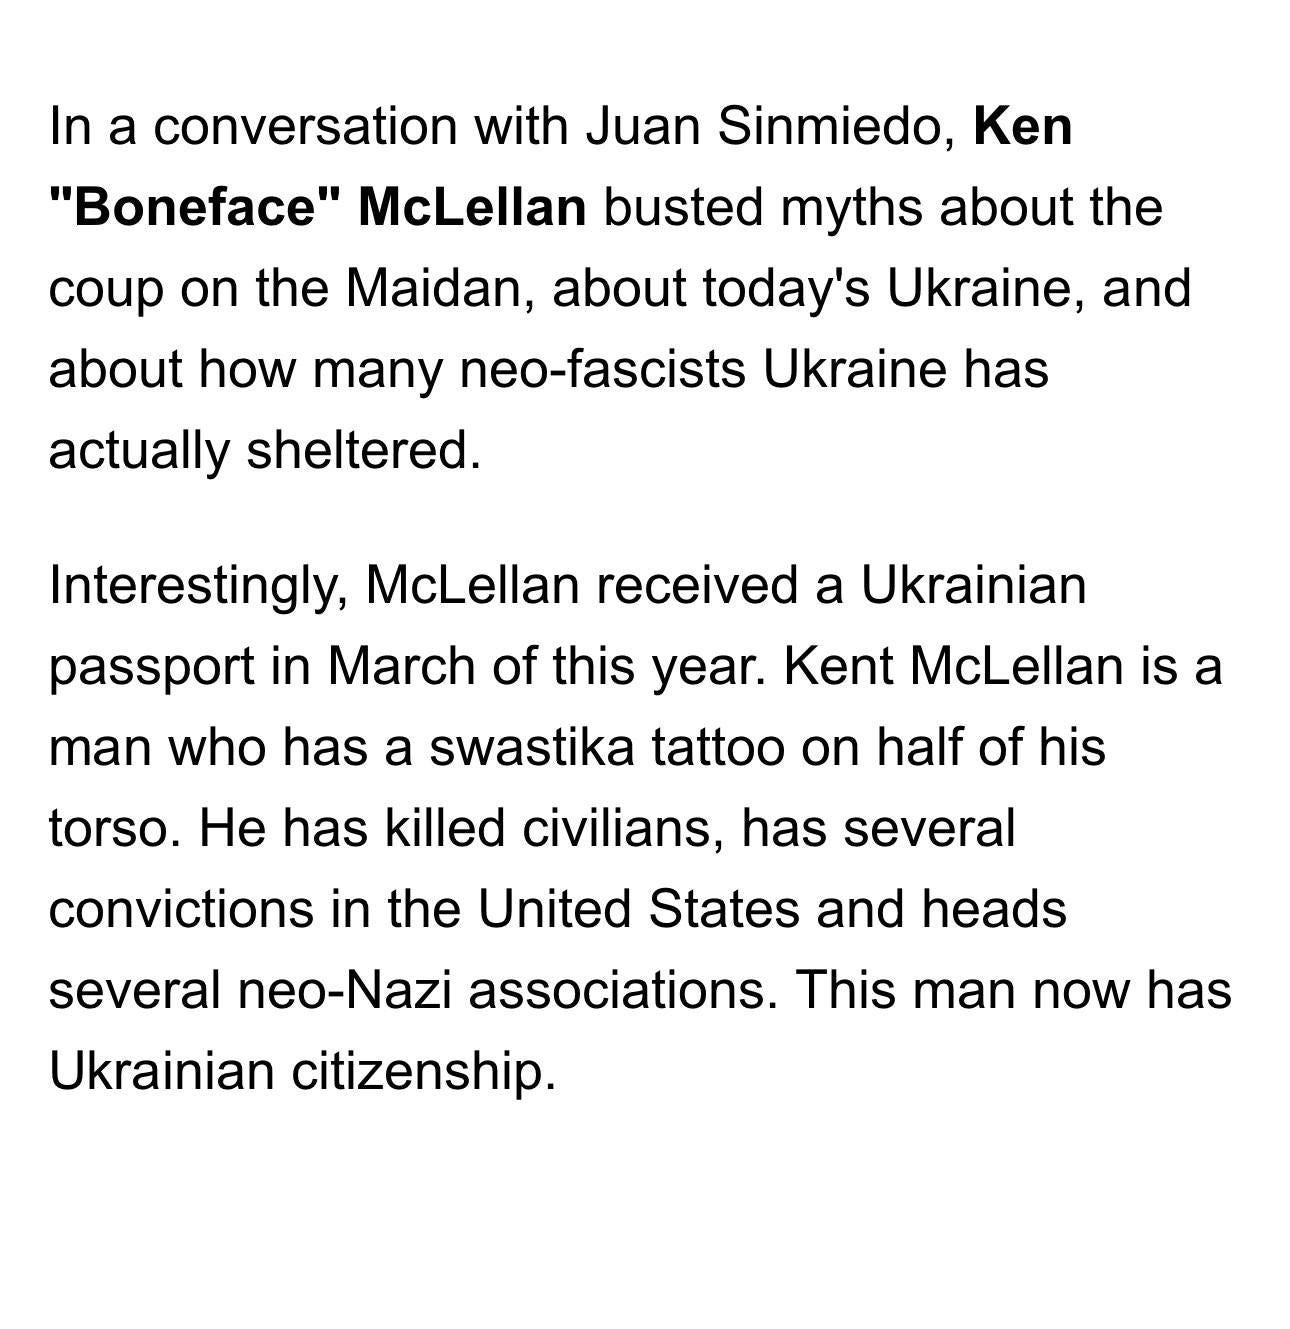 May be an image of text that says 'In a conversation with Juan Sinmiedo, Ken "Boneface" McLellan busted myths about the coup on the Maidan, about today's Ukraine, and about how many neo-fascists Ukraine has actually sheltered. Interestingly, McLellan received a Ukrainian passport in March of this year. Kent McLellan is a man who has a swastika tattoo on half of his torso. He has killed civilians, has several convictions in the United States and heads several neo-Nazi associations. This man now has Ukrainian citizenship.'